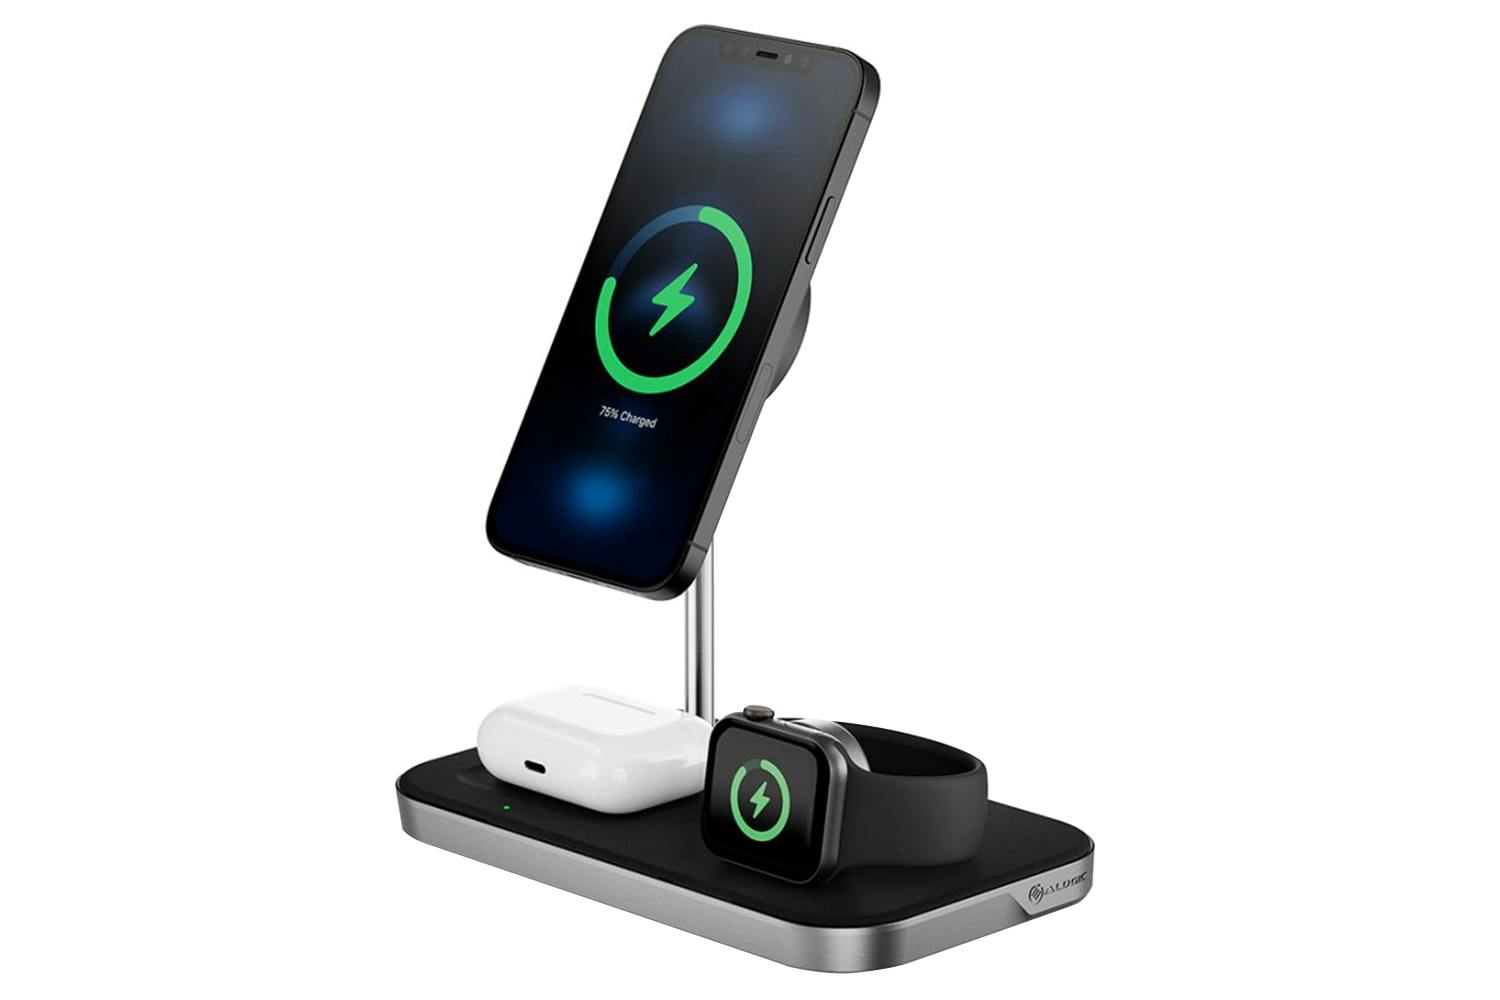 Wireless Charging Station for iPhone, Watch, Airpods / Smartphone